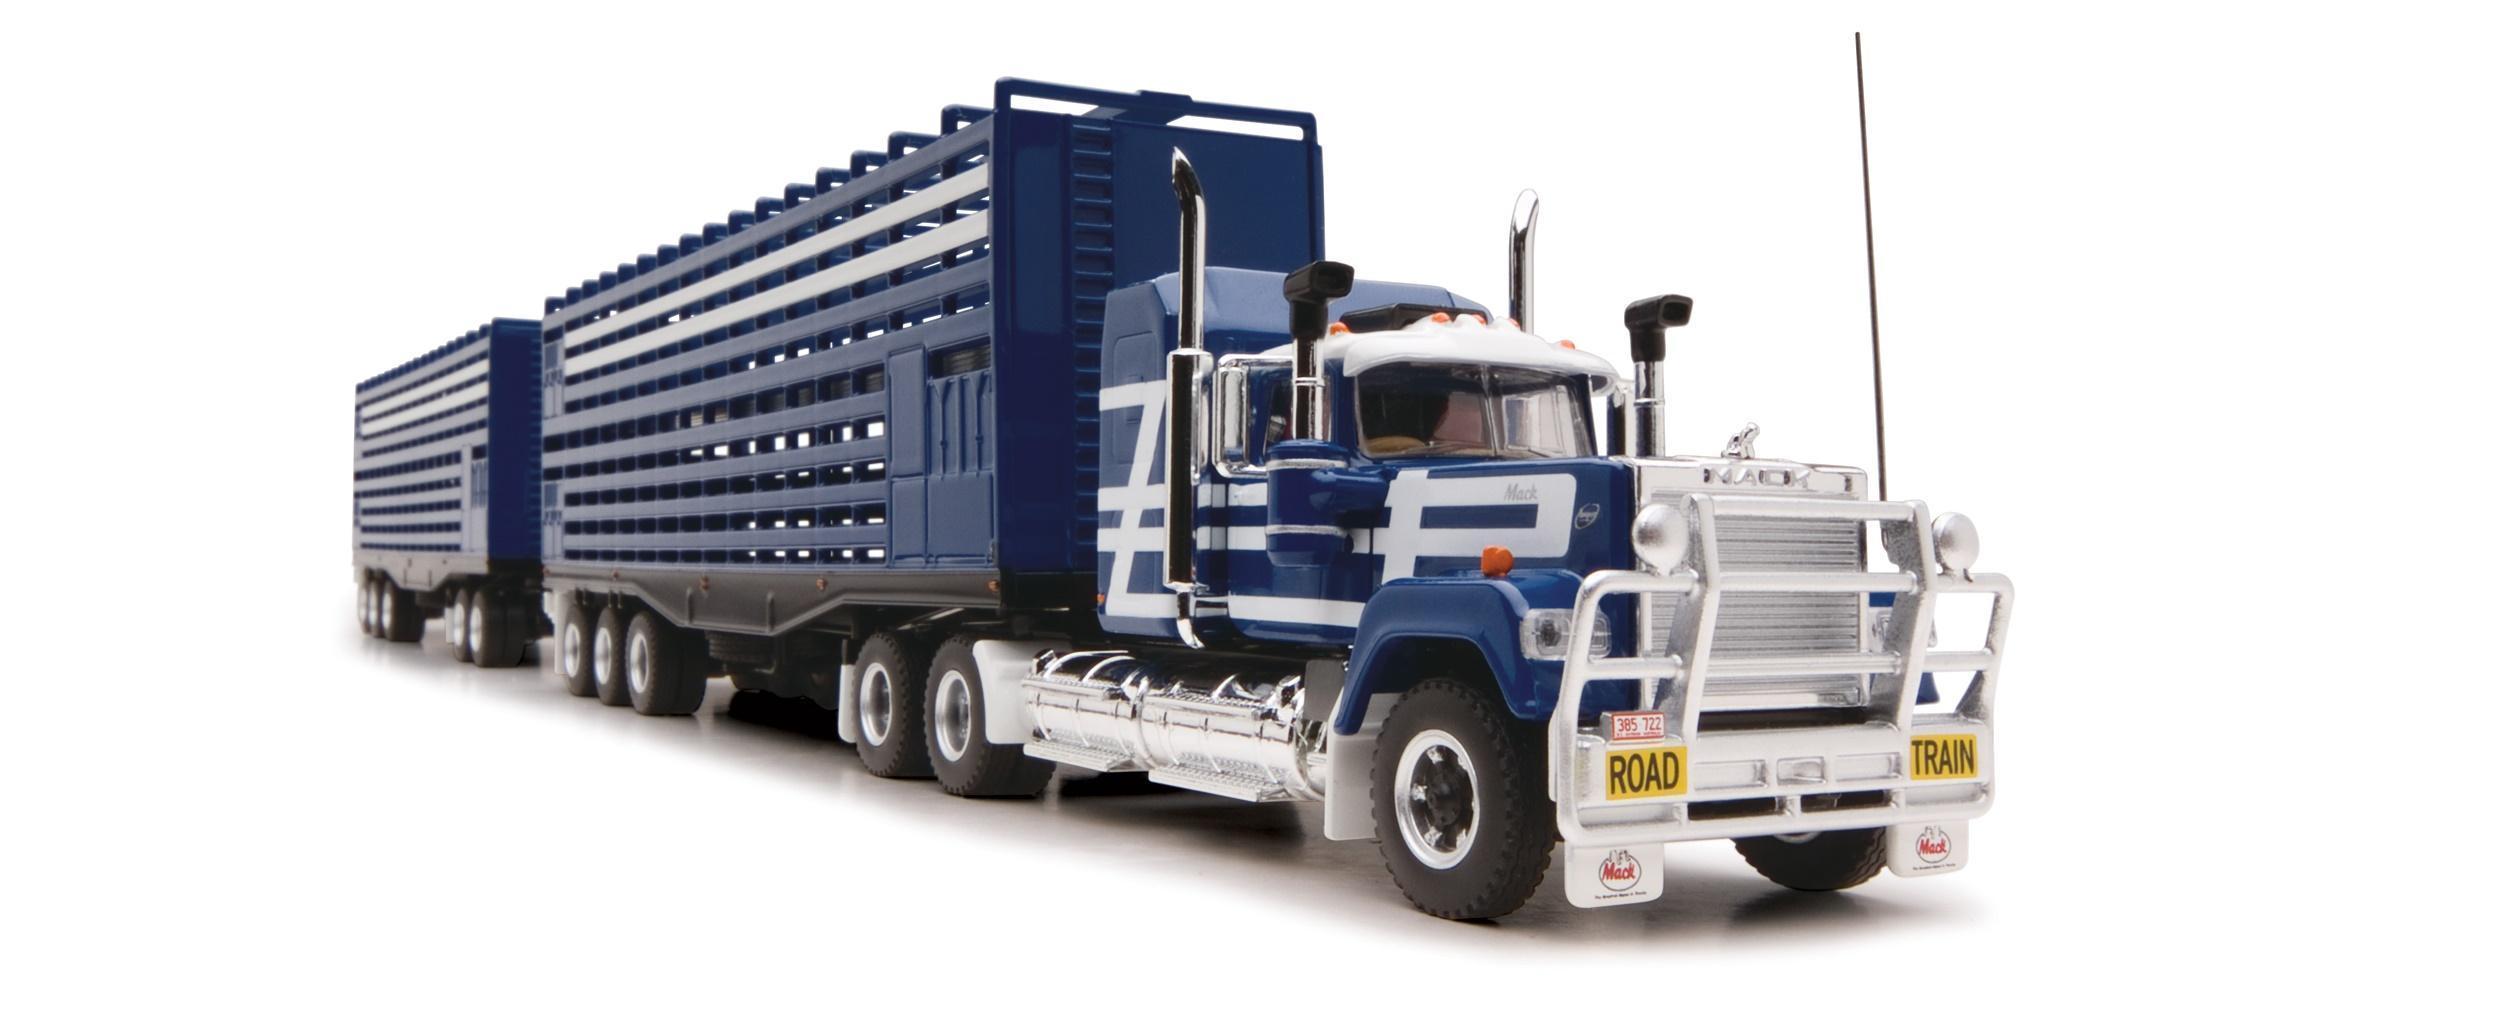 PRE ORDER - Highway Replicas Livestock Mack Road Train Blue & White Die Cast Model Truck With Additional Trailer & Dolly 1:64 (FULL PRICE - $248.00)